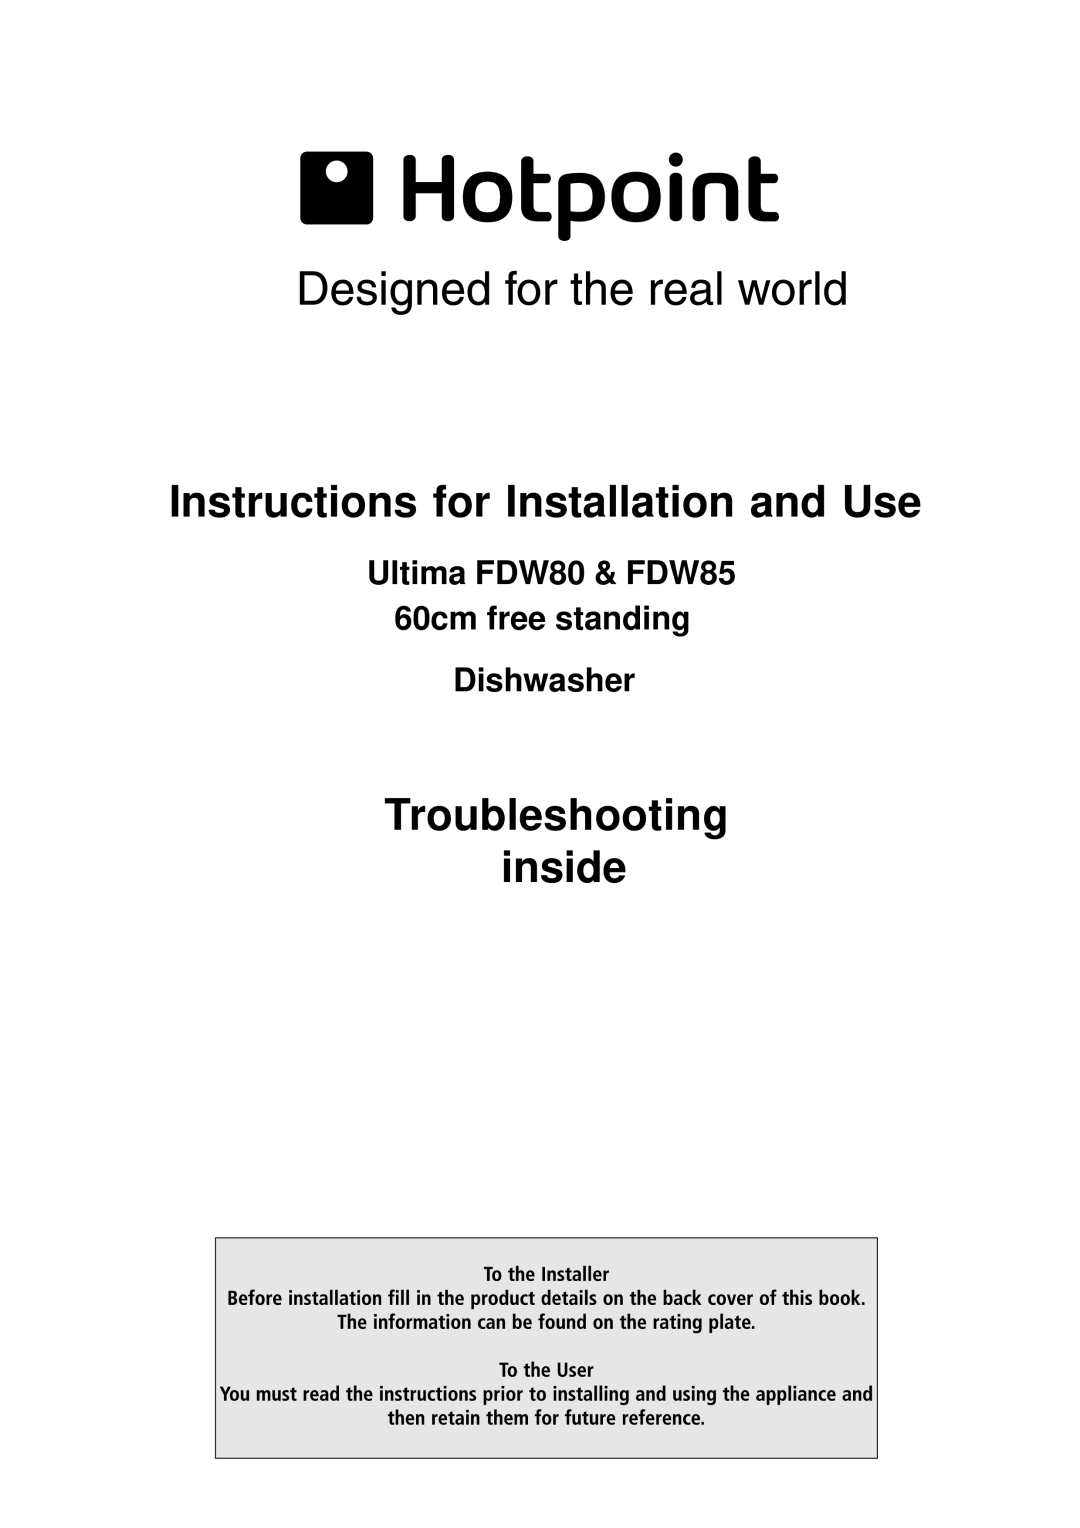 Hotpoint ULTIMA manual Instructions for use, Washing Machine, Swmd, Contents 